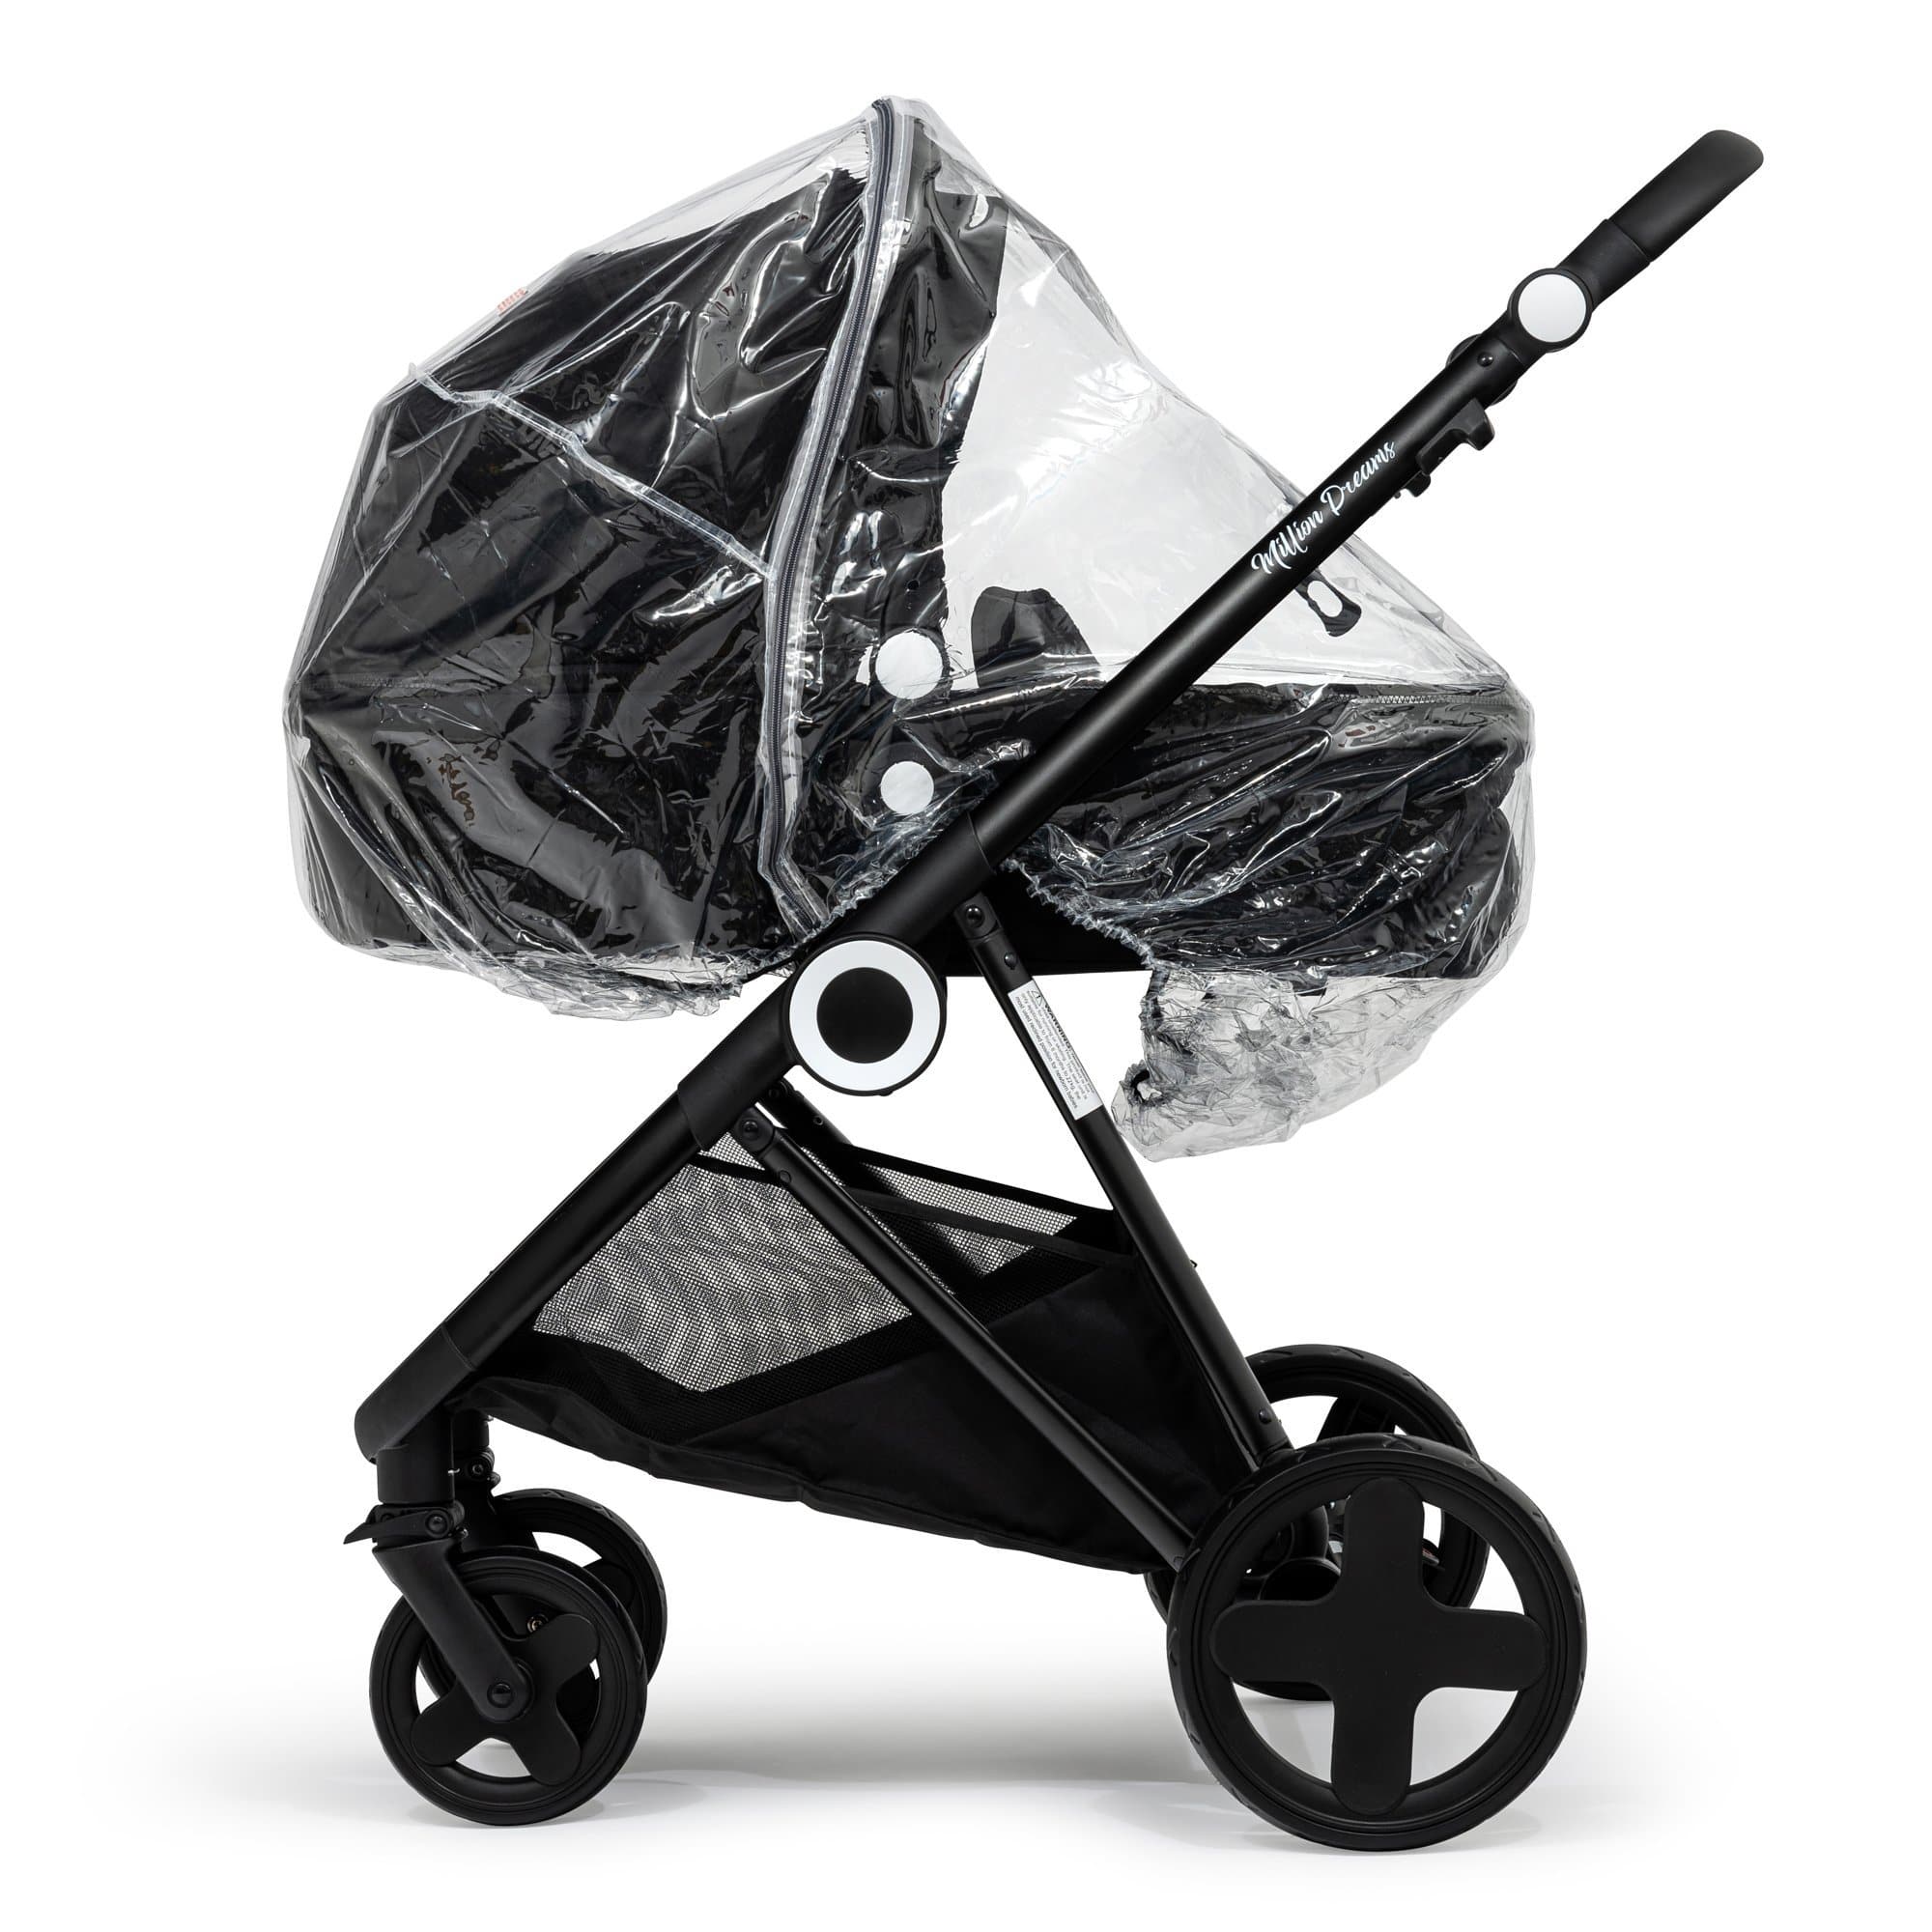 2 in 1 Rain Cover Compatible with Ickle Bubba - Fits All Models - For Your Little One